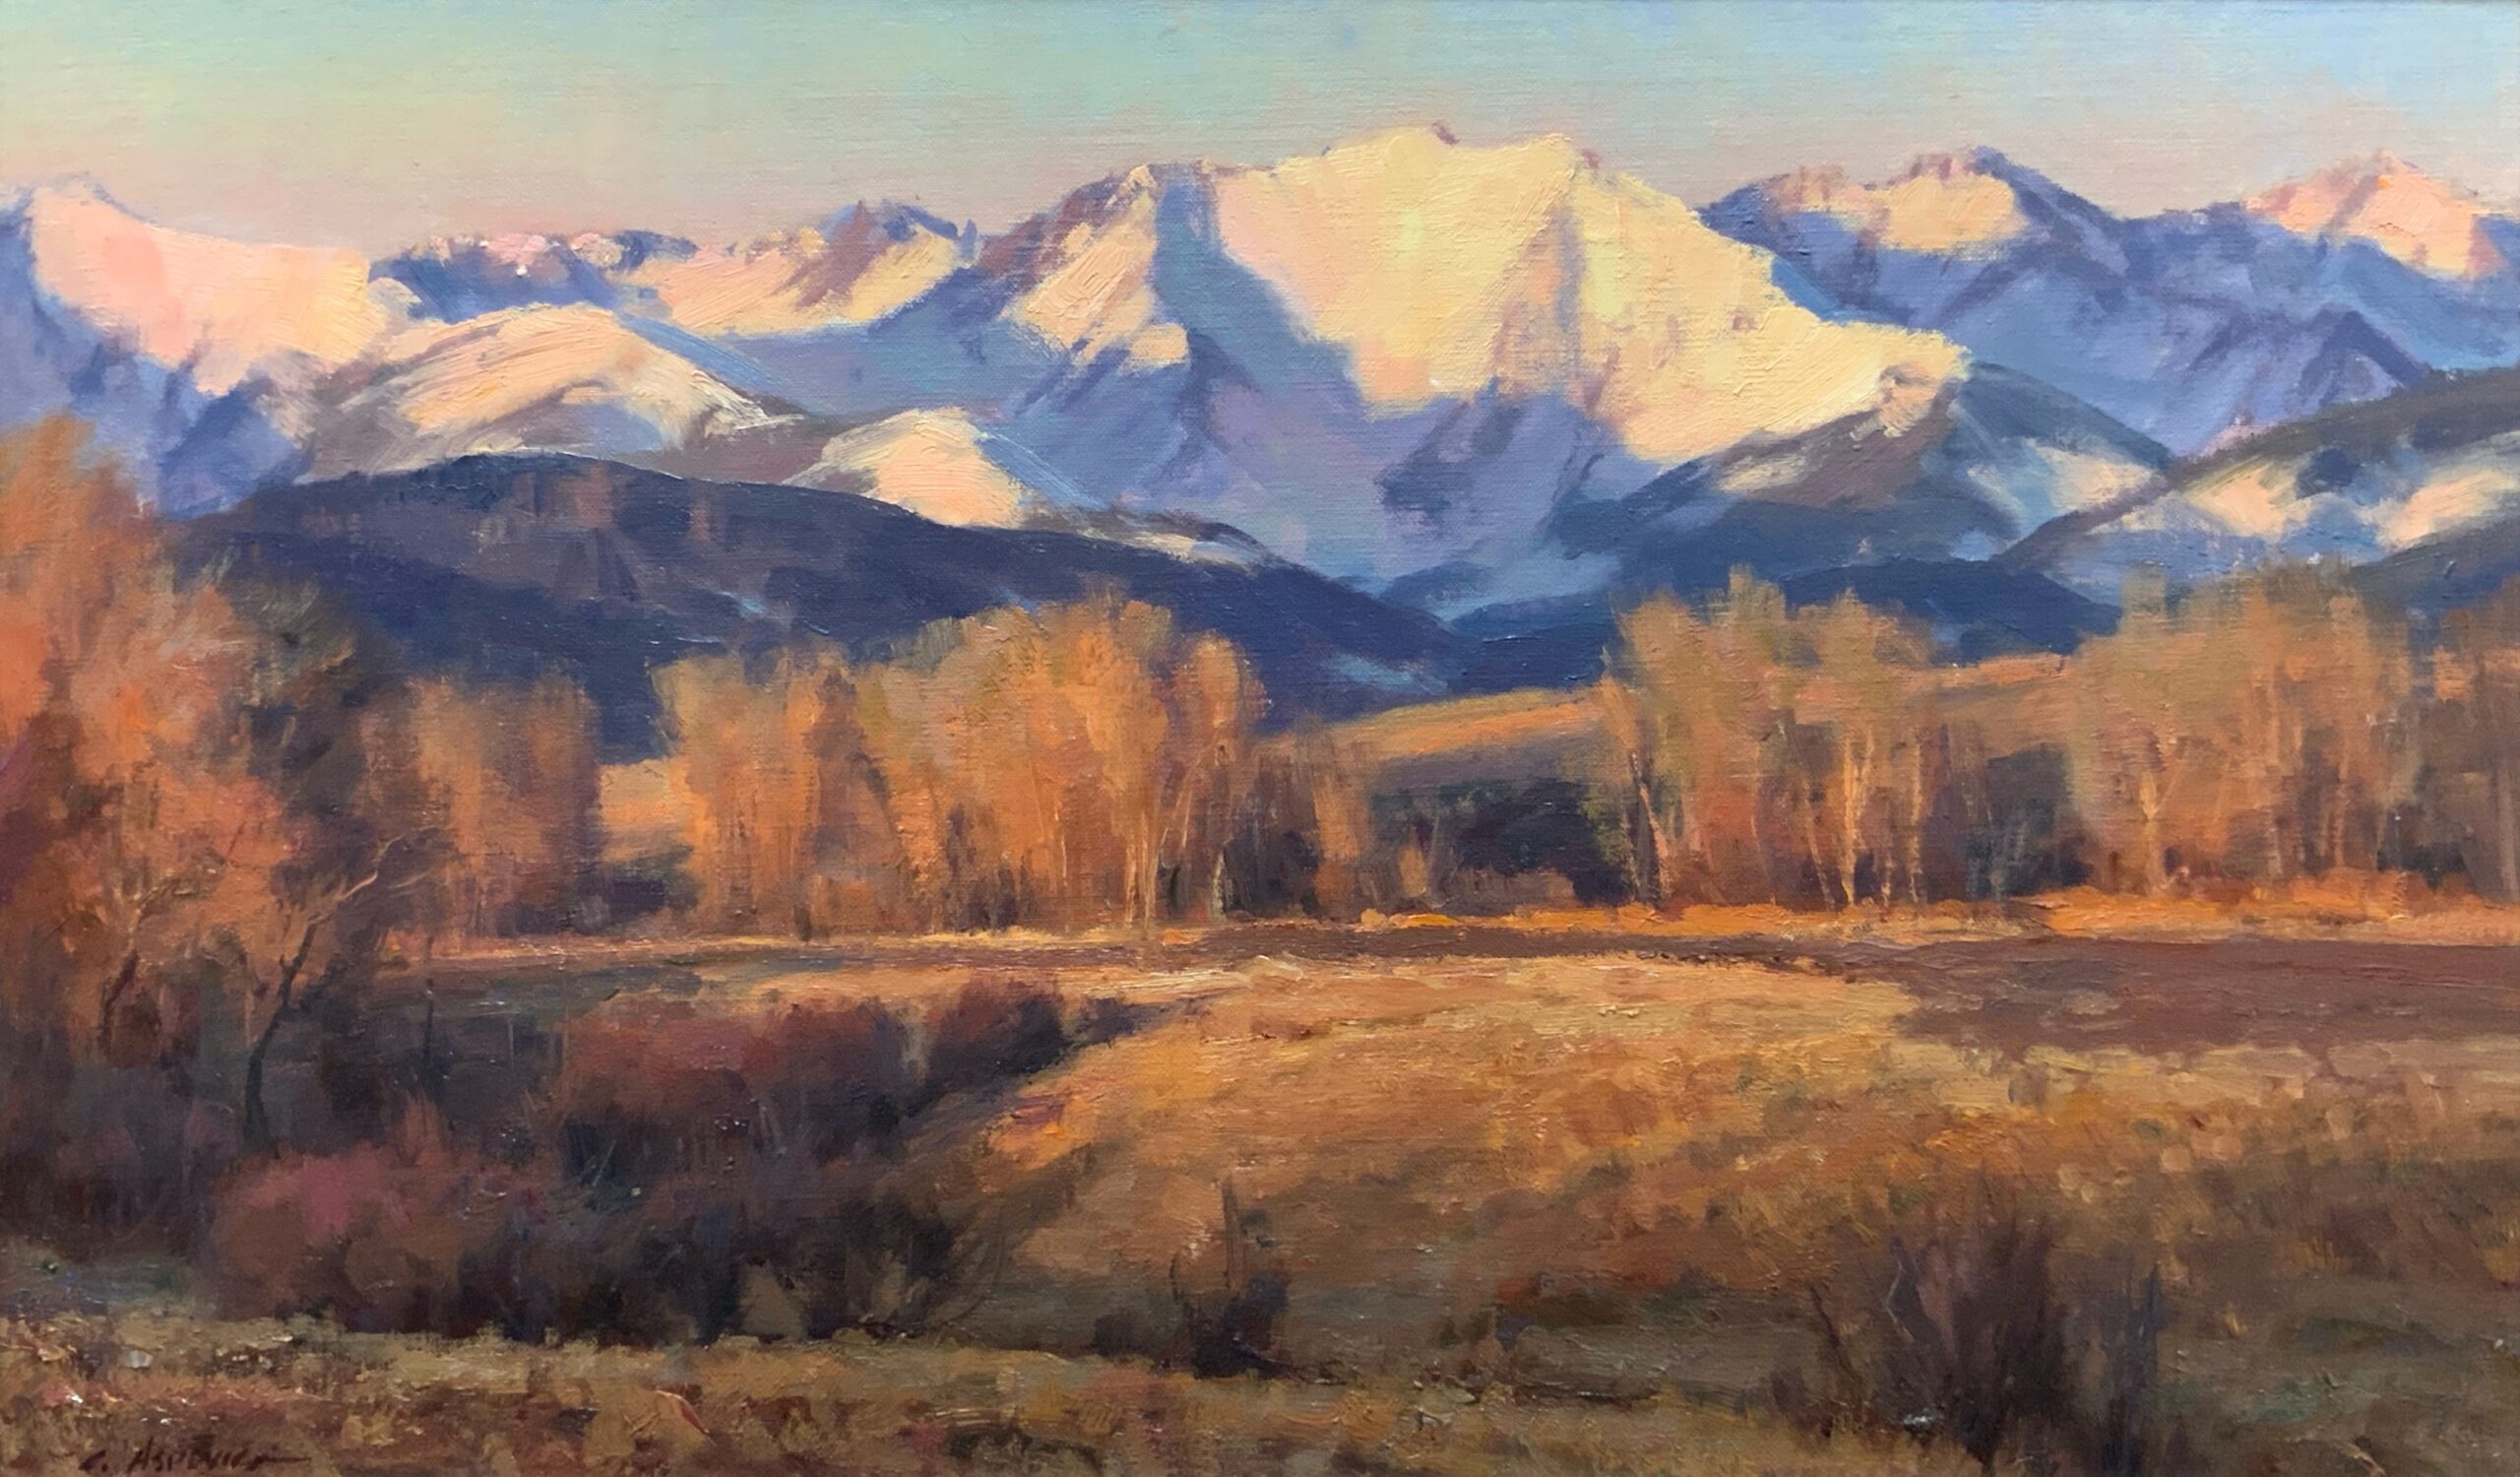 Crazy Mountain Original Art Piece available at Hindes Fine Art Gallery